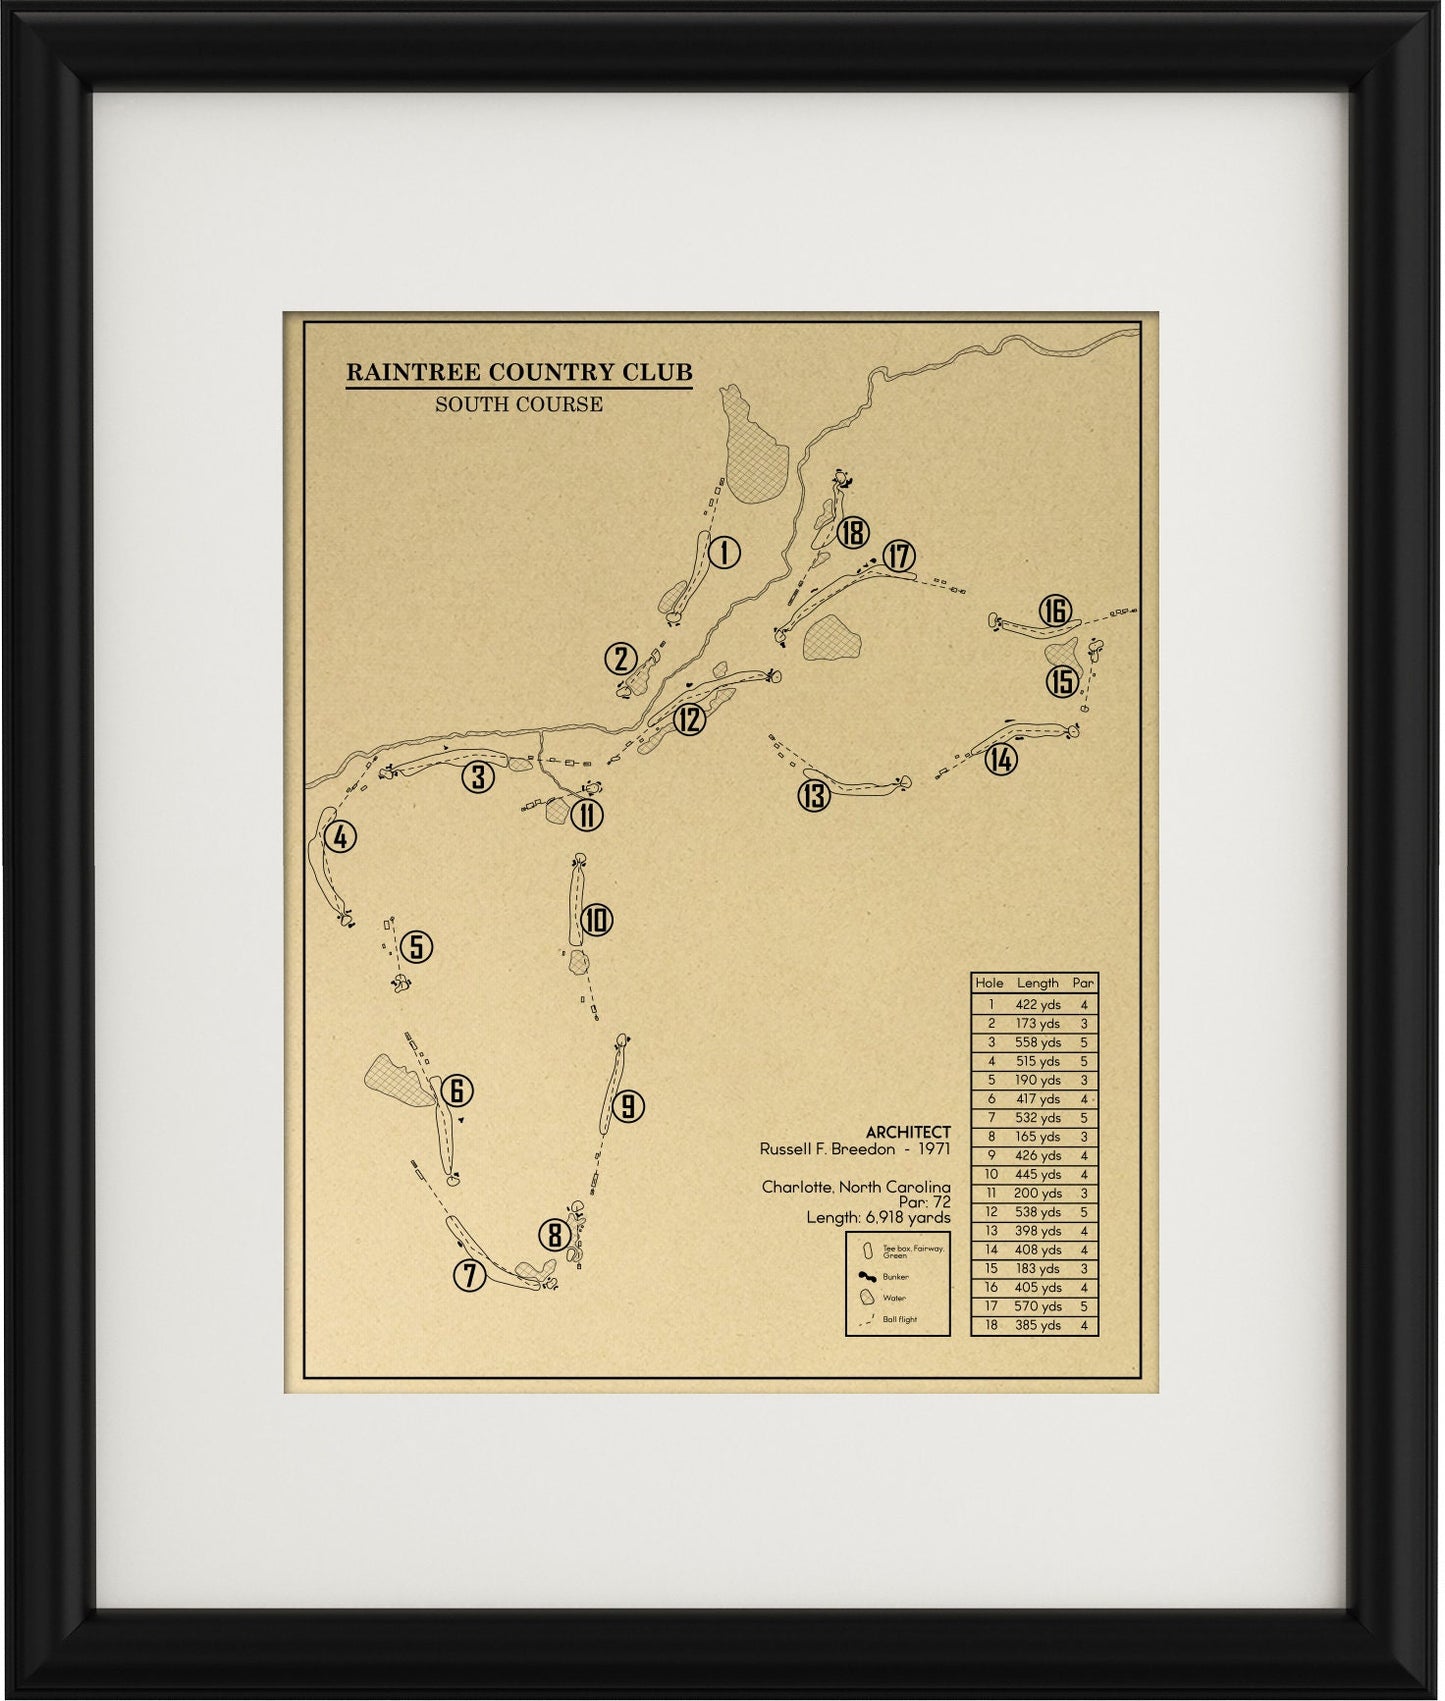 Raintree Country Club South Course Outline (Print)